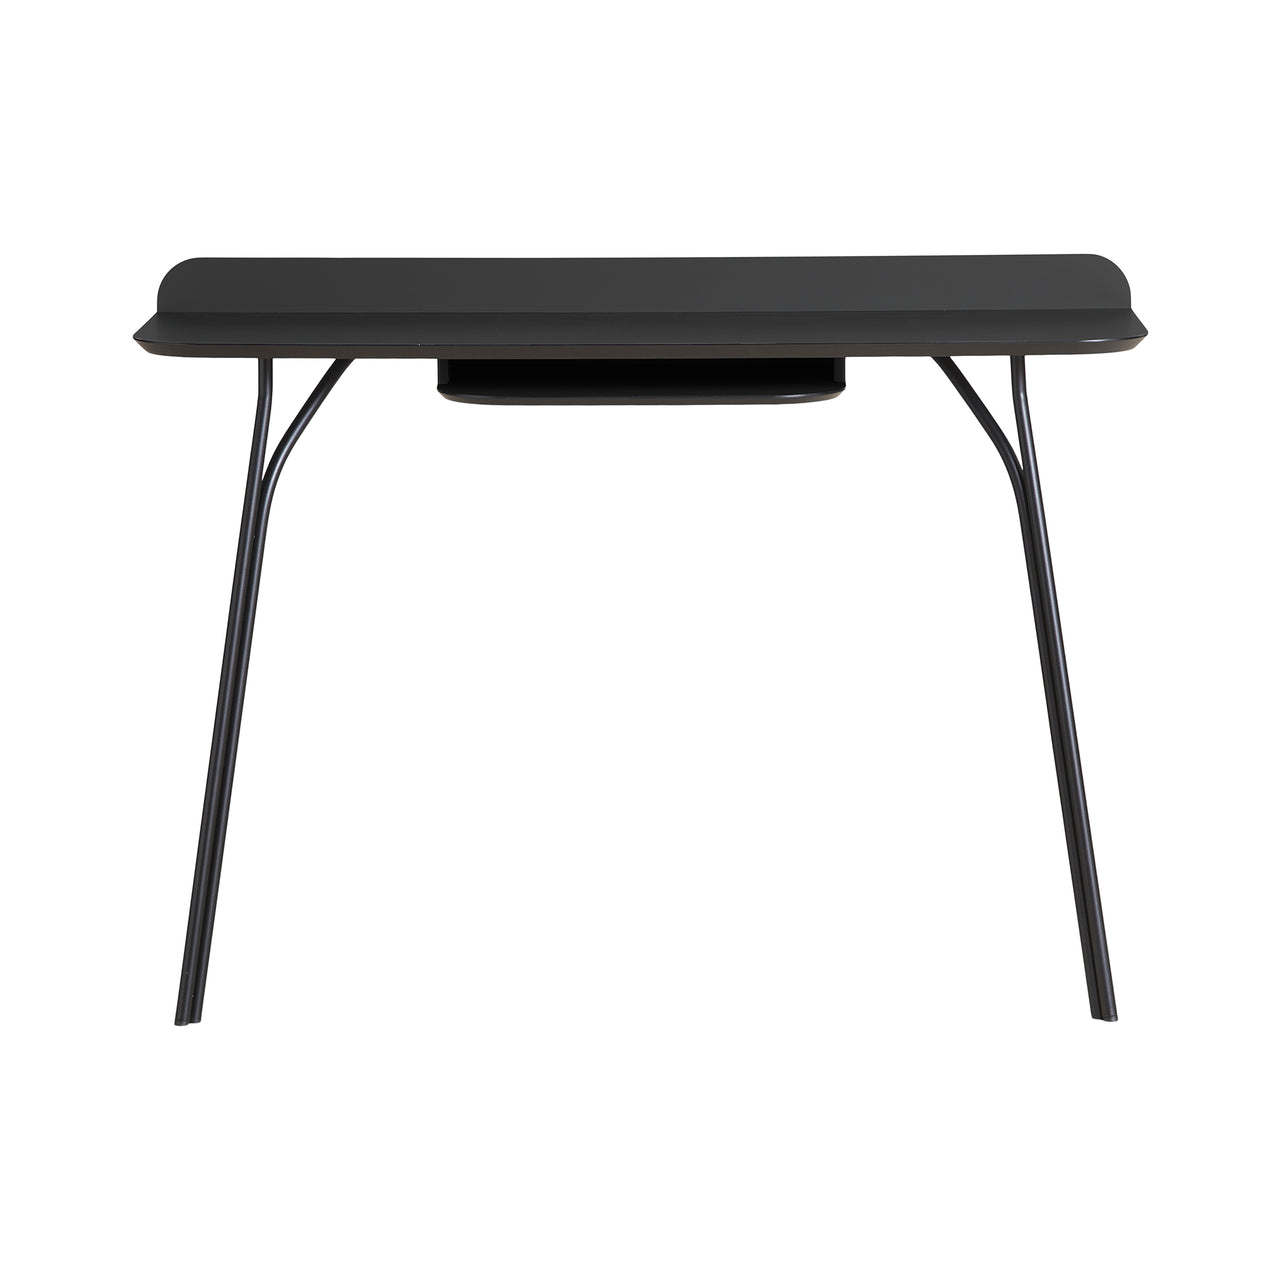 Tree Console Table: High + Charcoal Black + With Shelf